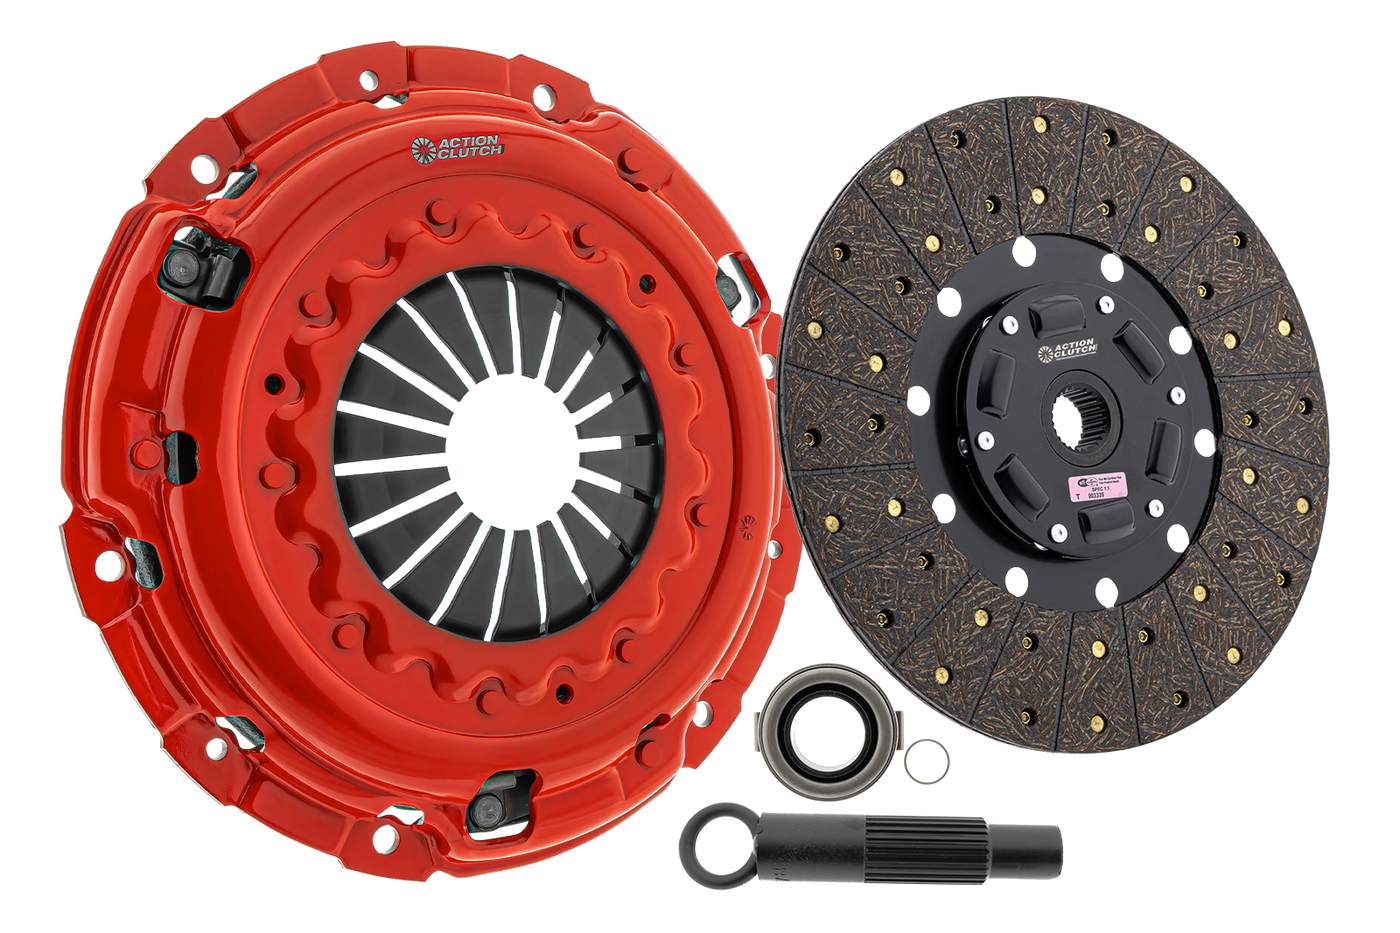 Stage 1 Clutch Kit (1OS) for Infiniti G35 2007-2008 3.5L (VQ35HR) With Heavy Duty Concentric Slave Cylinder